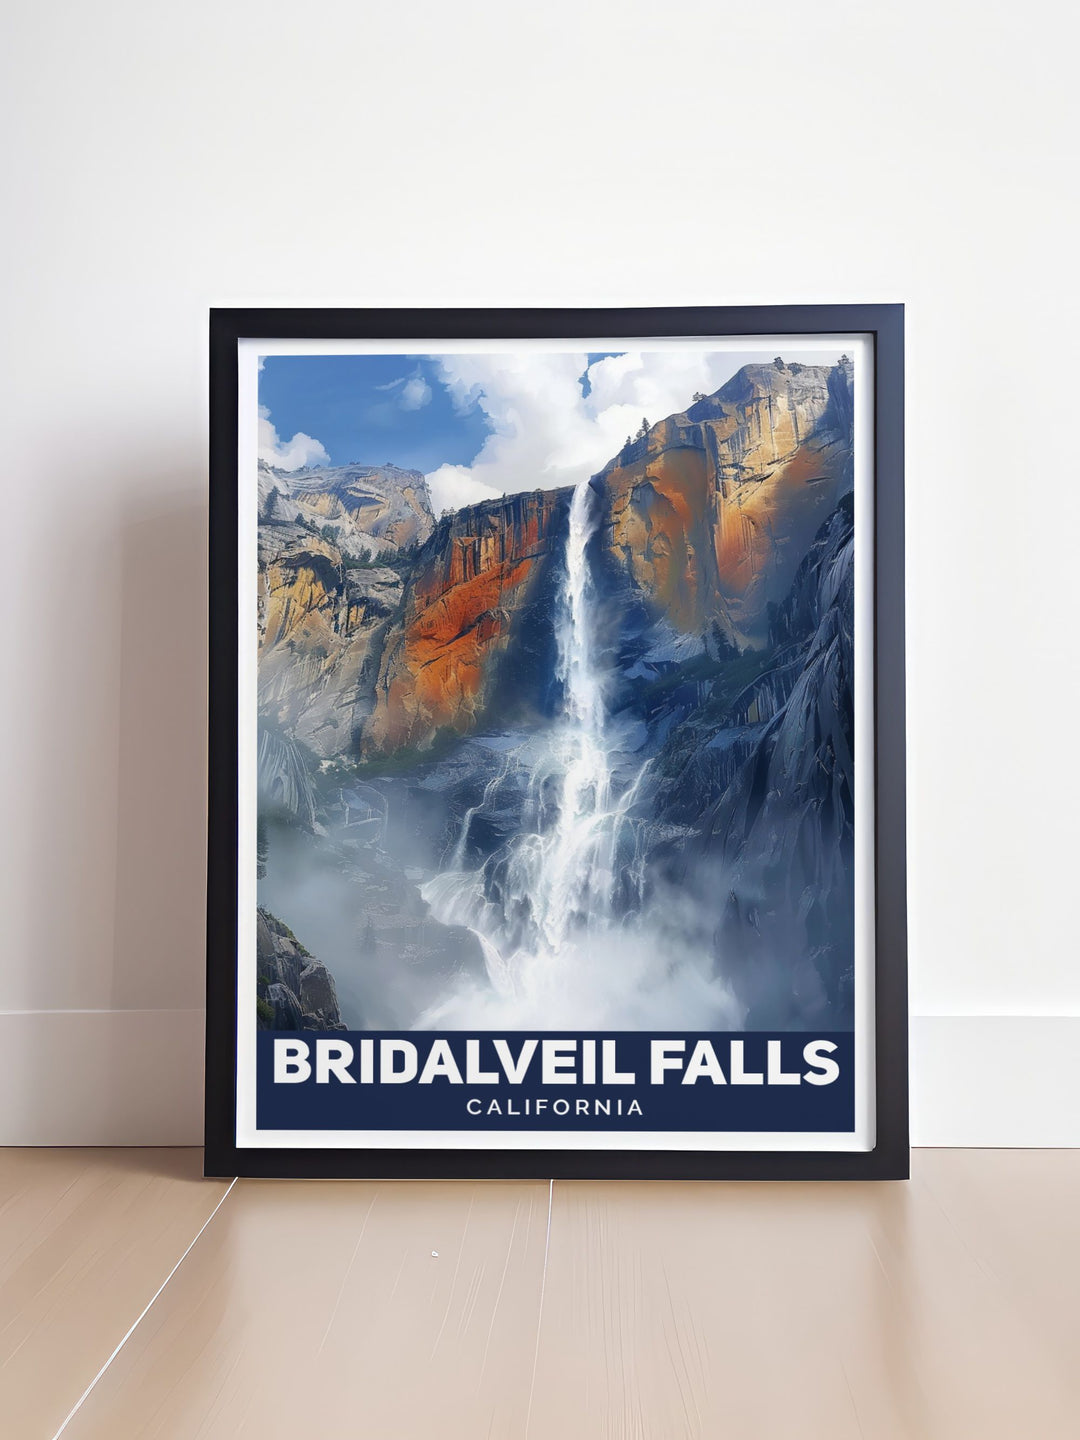 This Closeup Bridalveil Falls poster captures the timeless beauty of one of Californias most iconic waterfalls making it an ideal choice for anyone looking for California travel art to enhance their home or office decor. A thoughtful gift for any occasion.